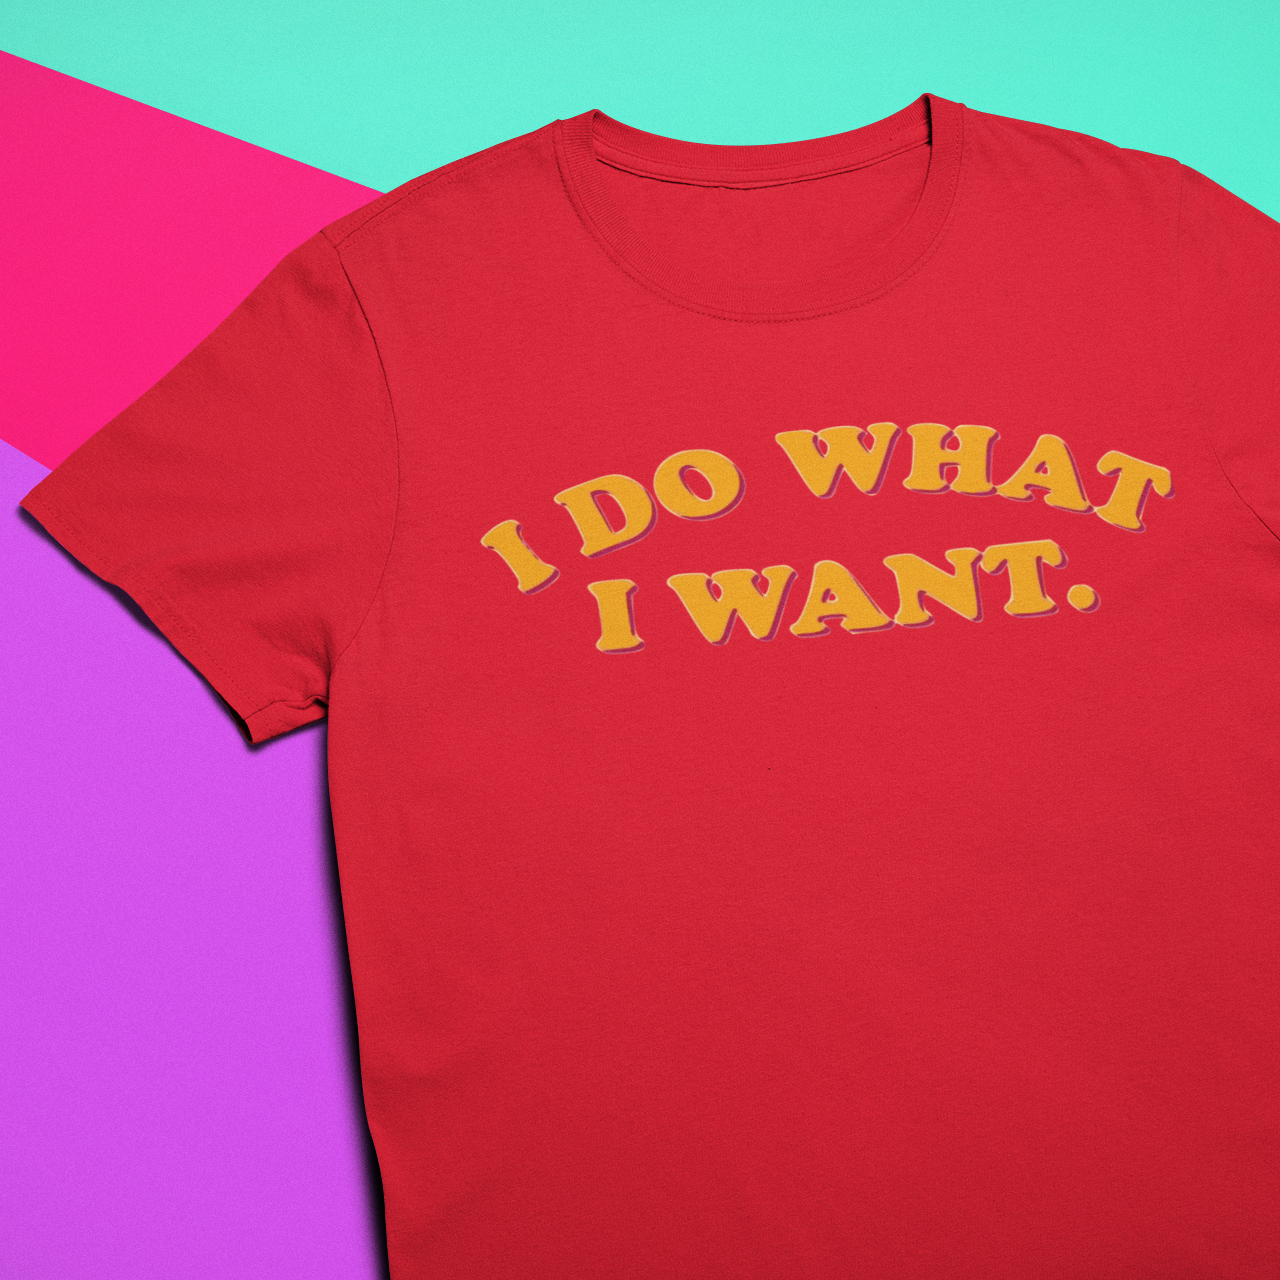 I DO WHAT I WANT T-SHIRT